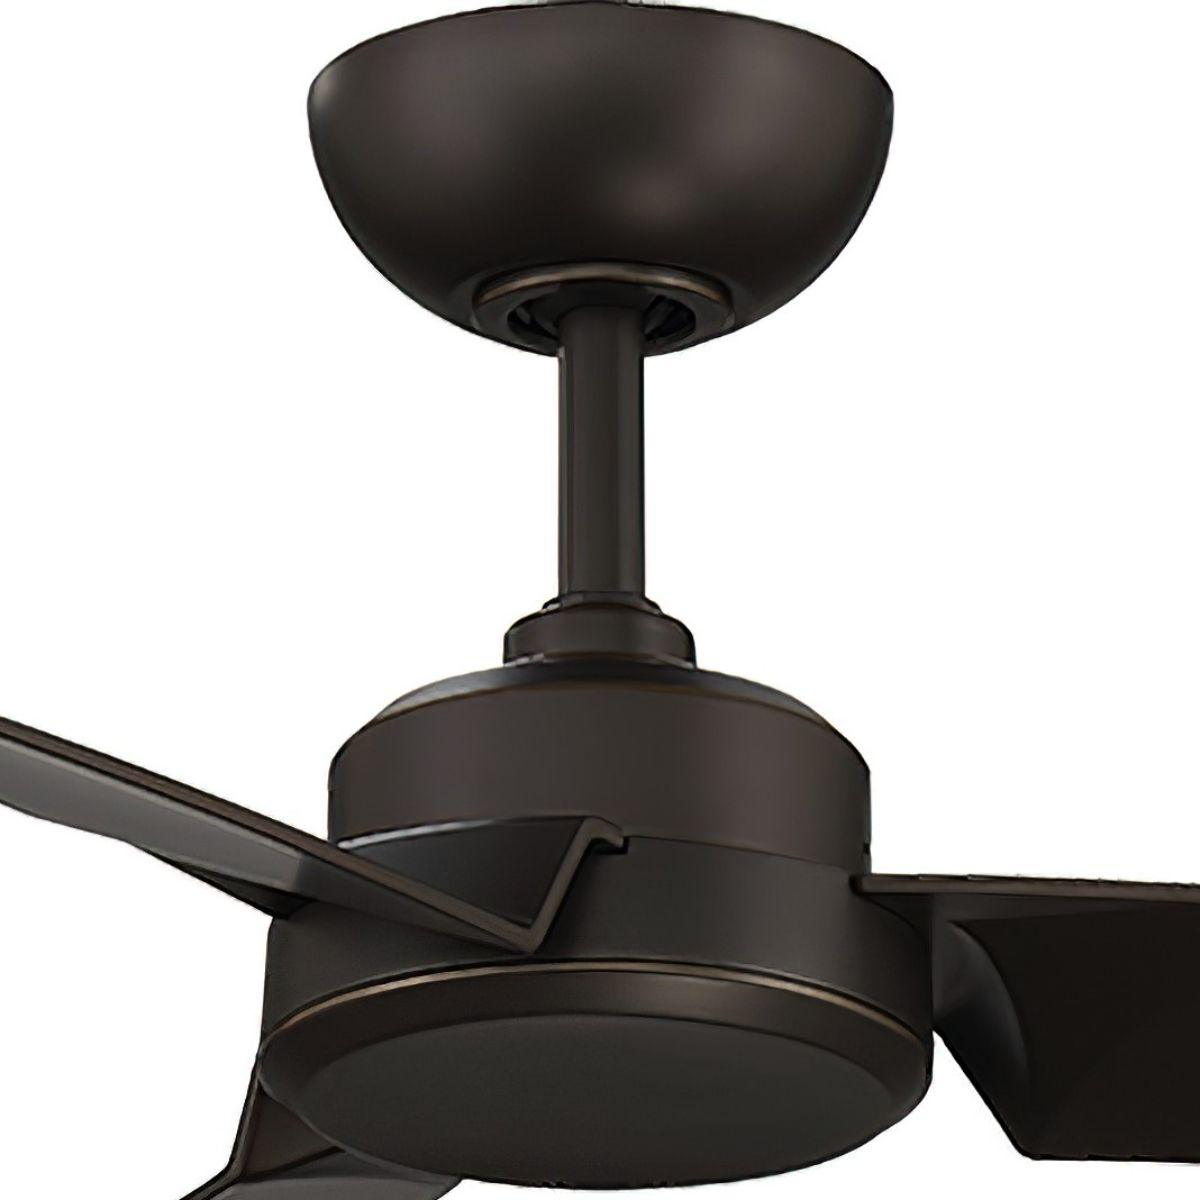 Roboto 62 Inch Outdoor Smart Ceiling Fan With Remote - Bees Lighting